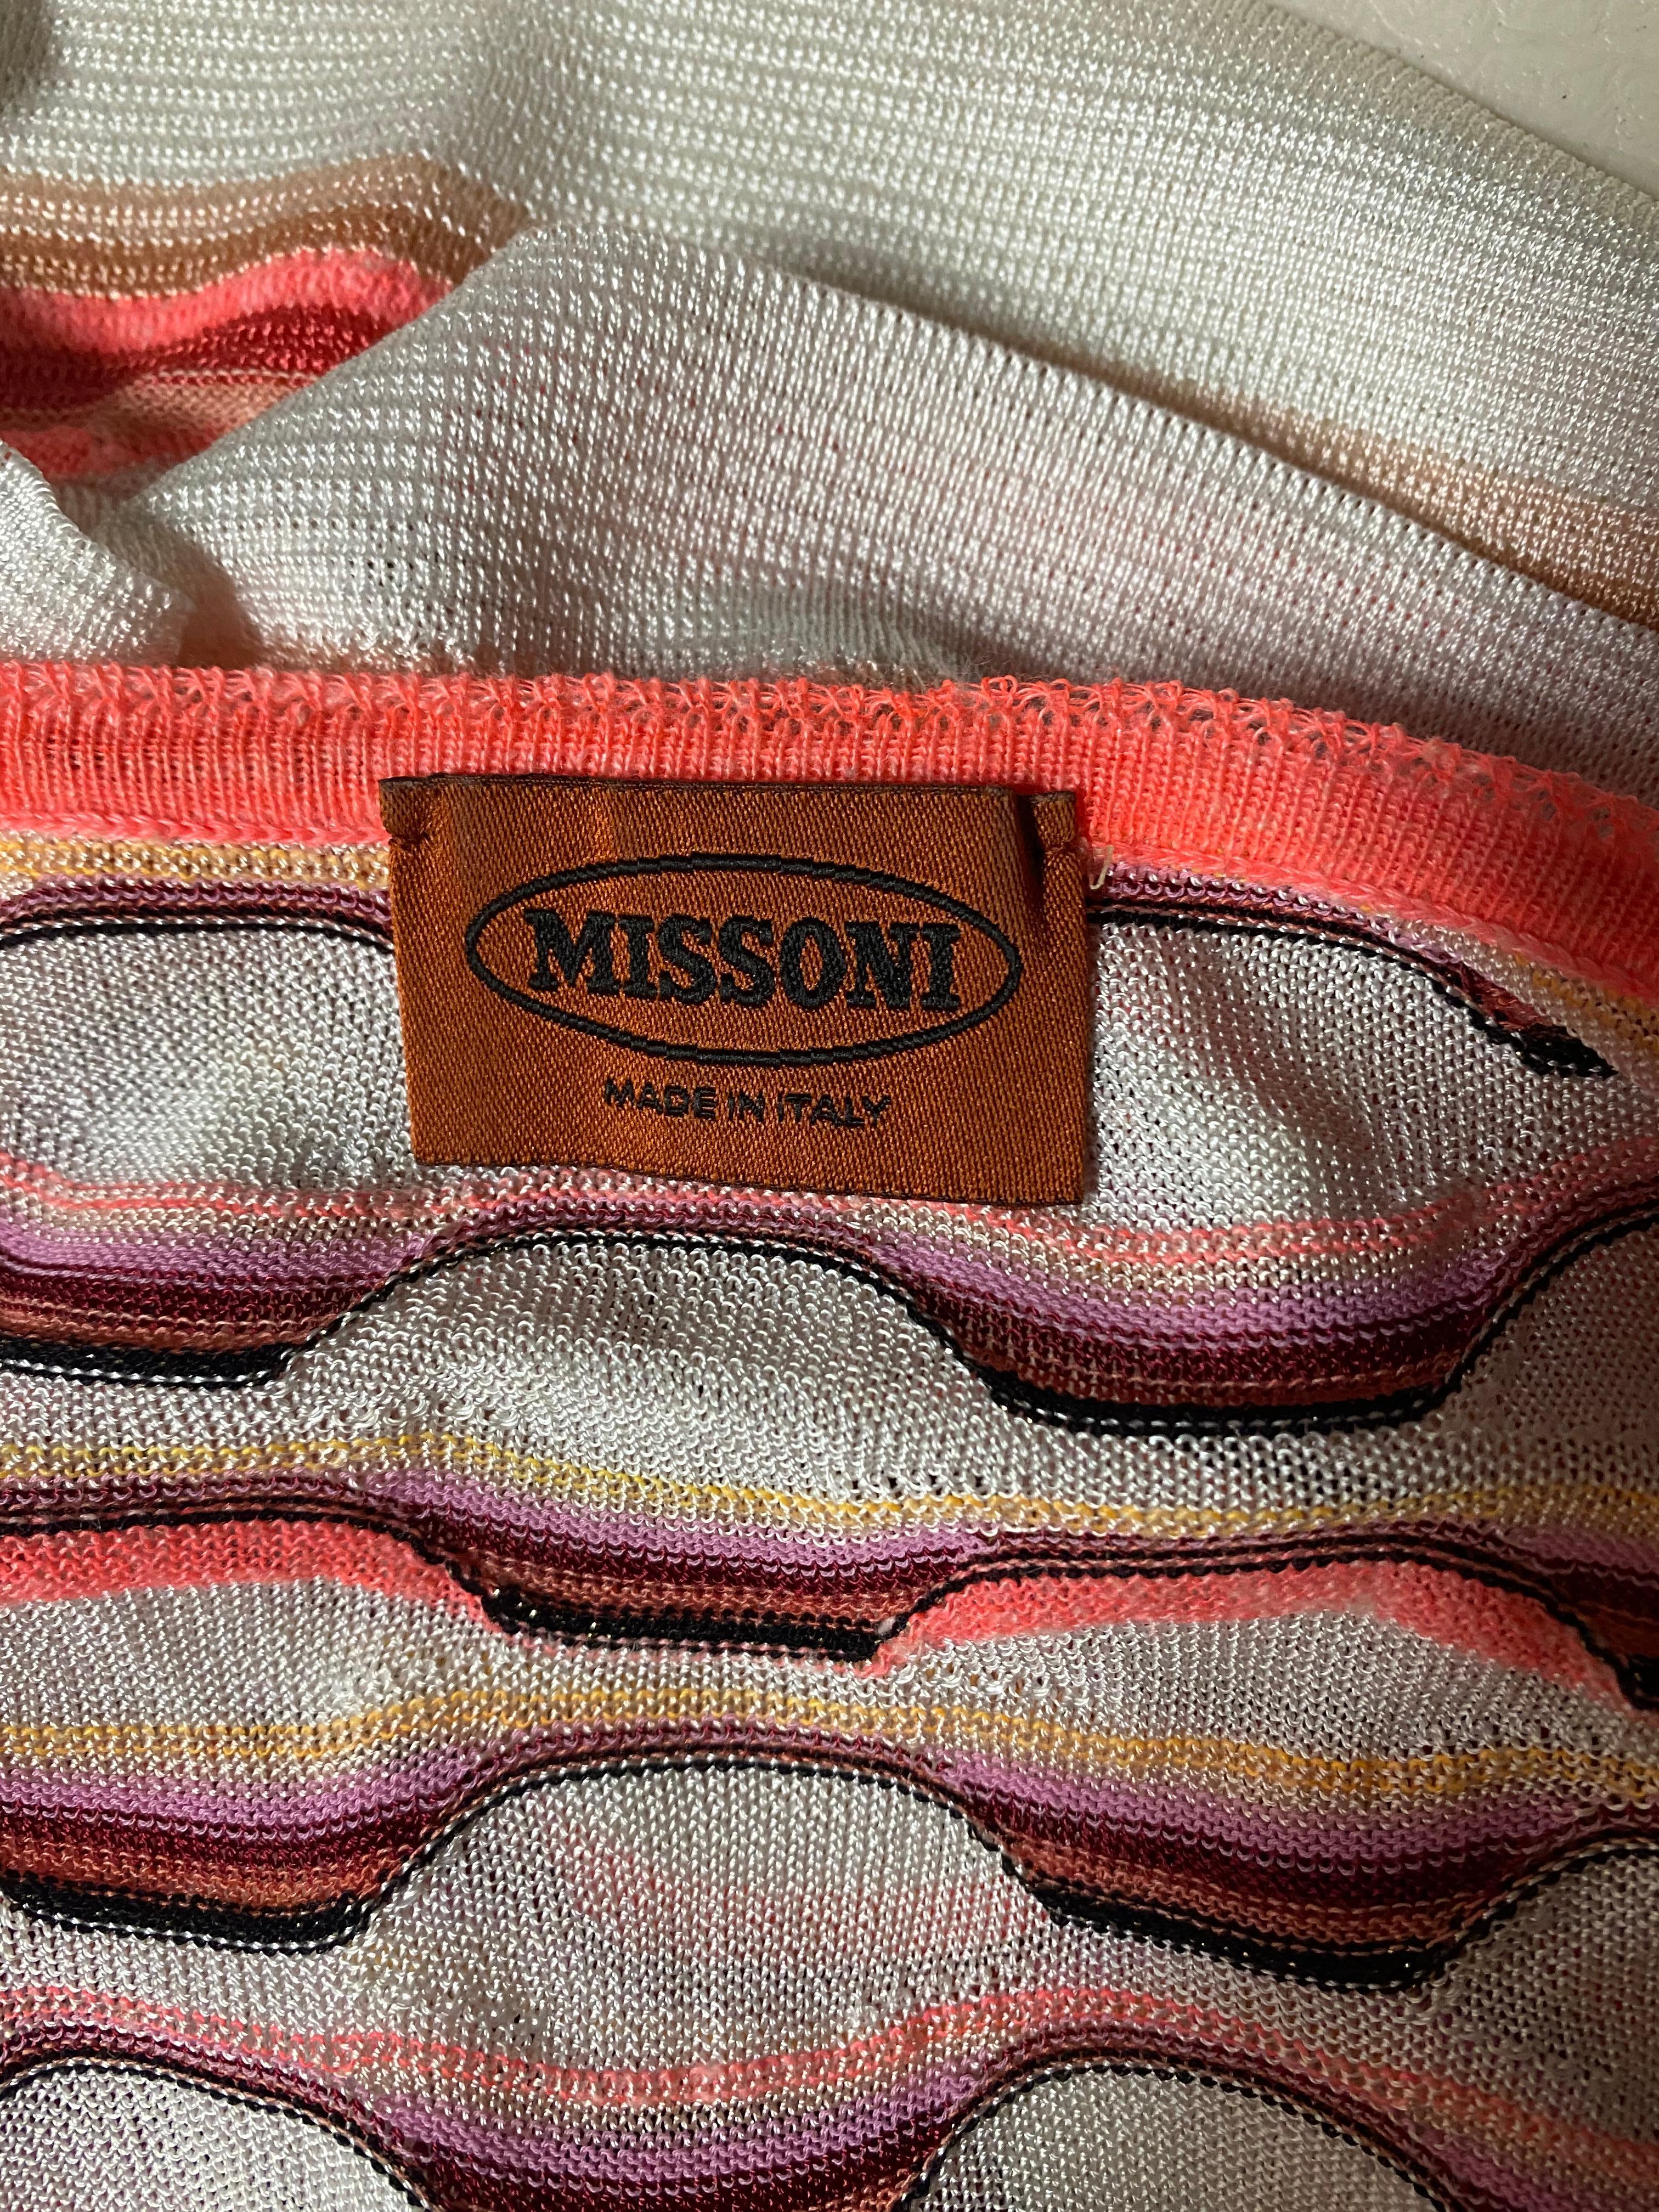 Women's Vintage Missoni White and Orange T- Shirt Top For Sale